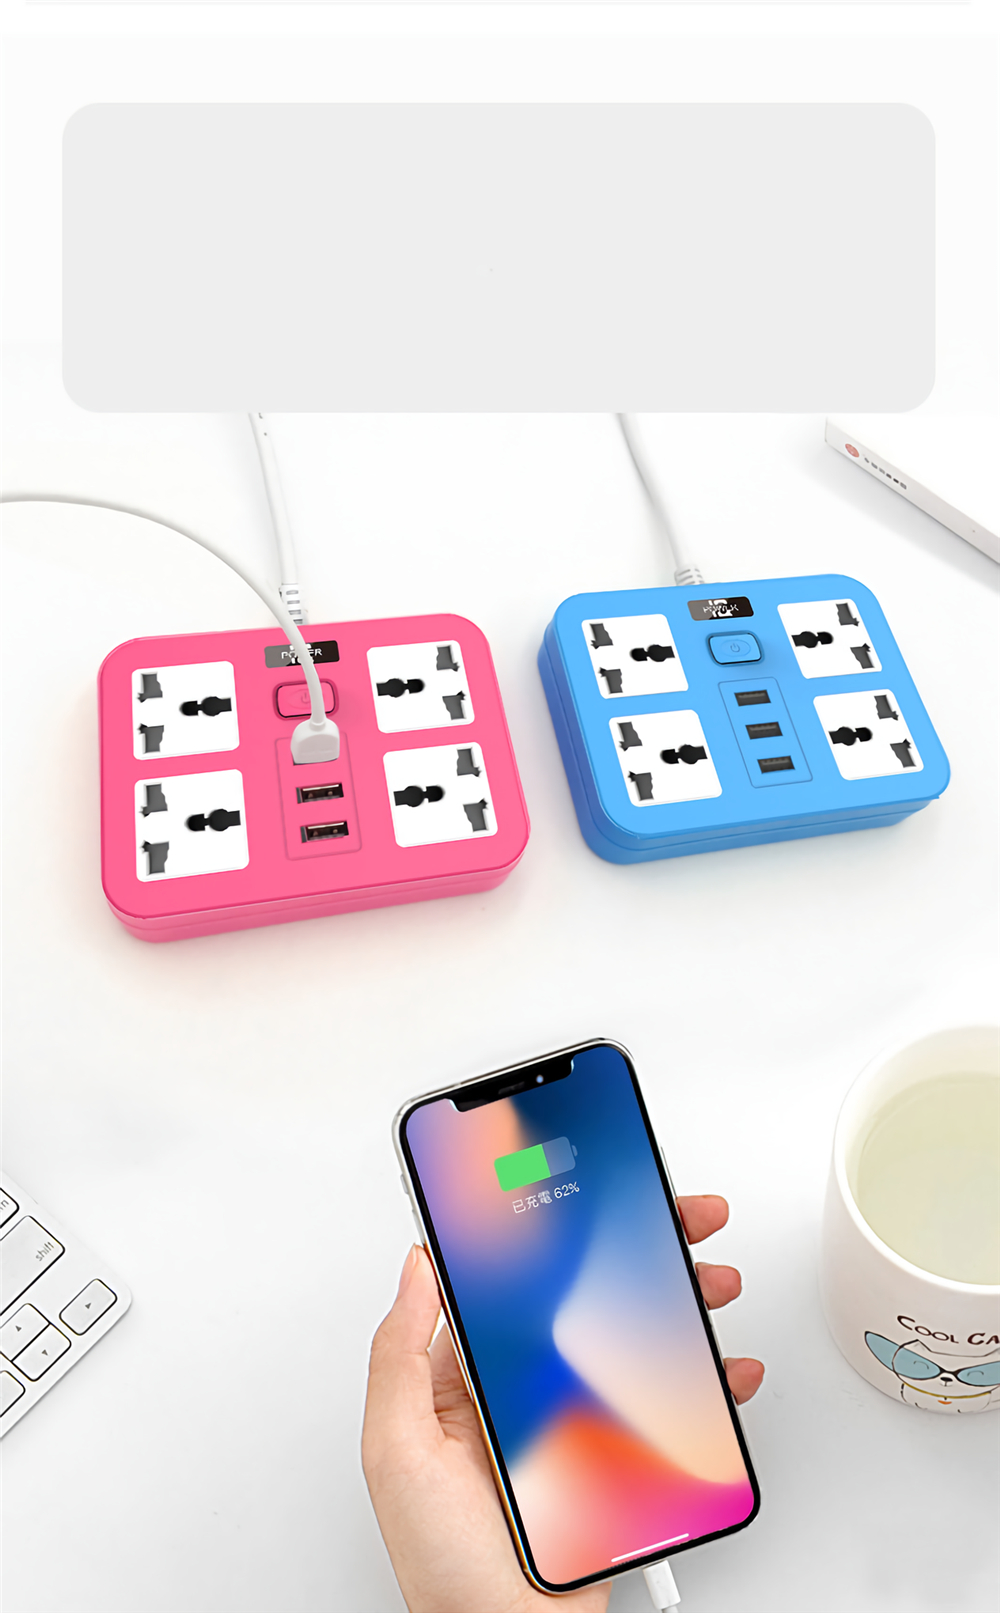 Power-Socket-3-Outlet-4-USB-Ports-Hub-Multi-Portable-Electrical-Power-Strip-Plugs-Adaptor--for-Home--1713505-4